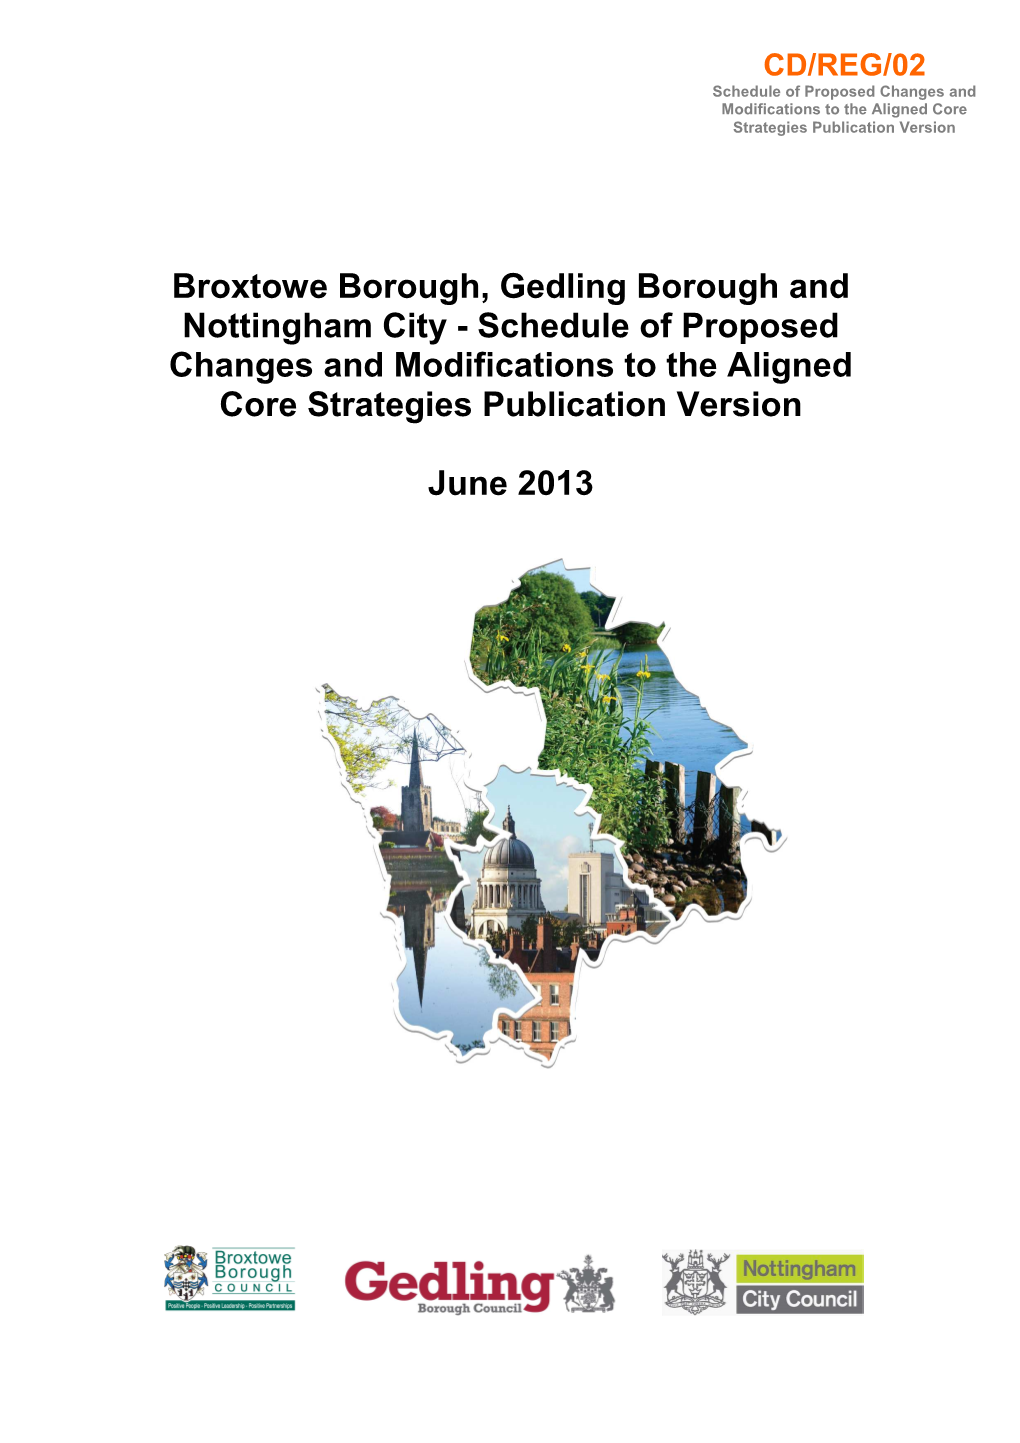 Schedule of Proposed Changes and Modifications to the Aligned Core Strategies Publication Version